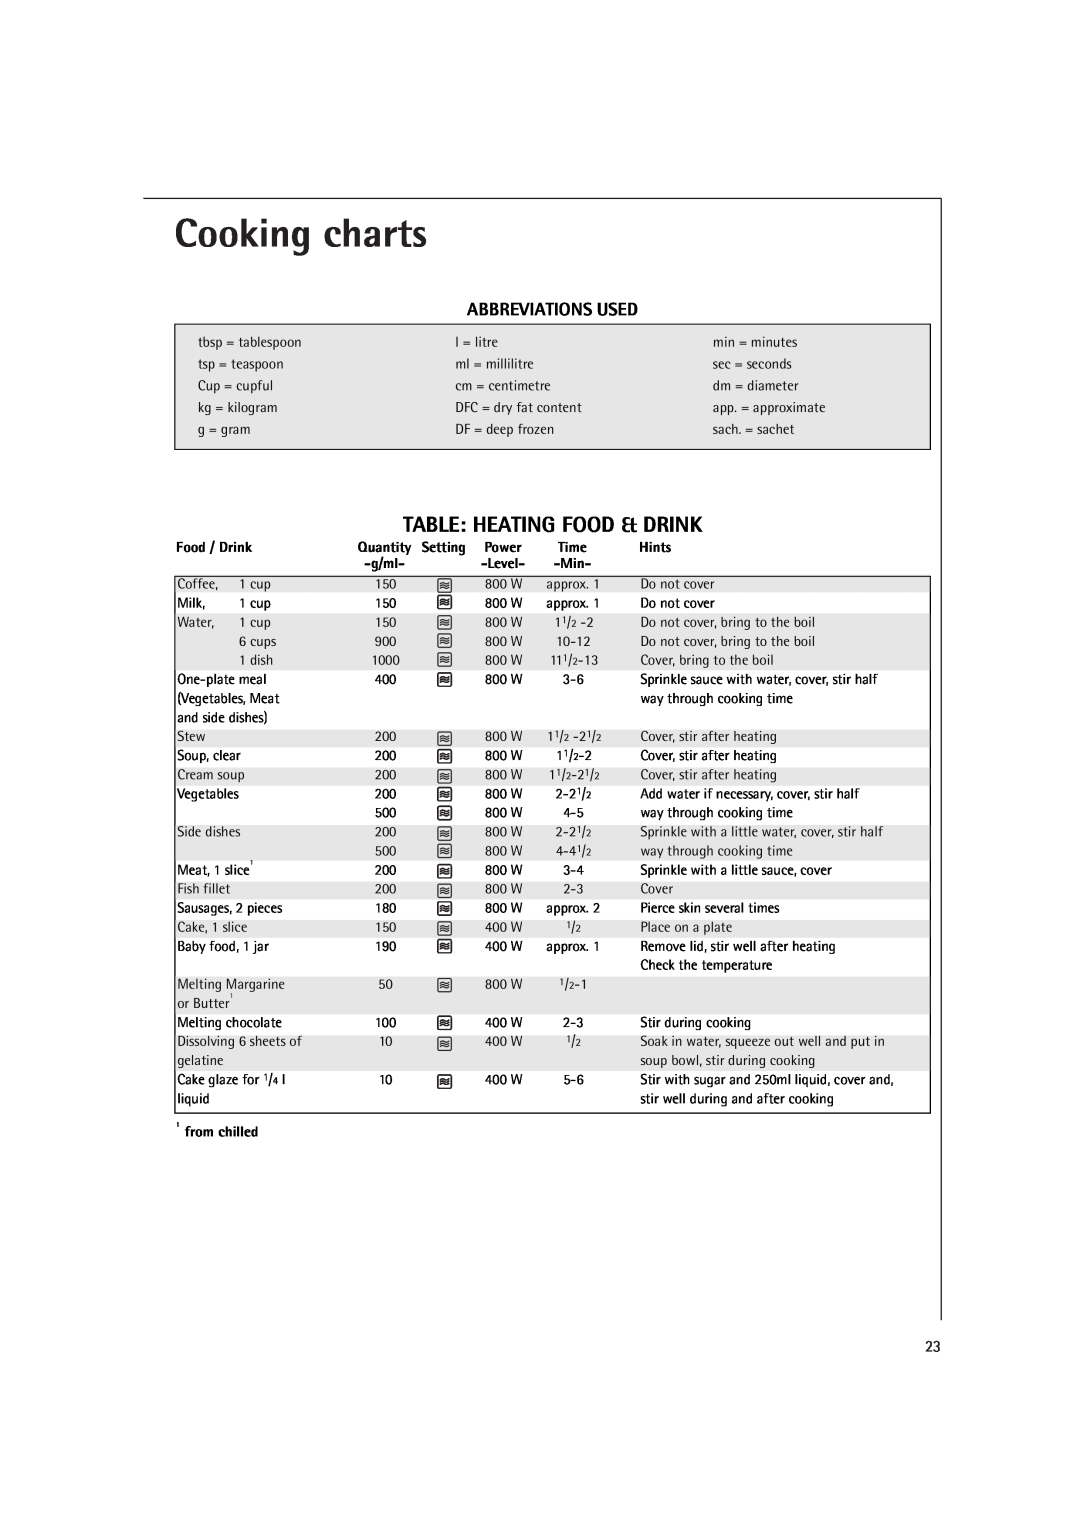 AEG MCD1751E Cooking charts, Table Heating Food & Drink, Abbreviations Used, Food / Drink, Quantity Setting, Hints, g/ml 